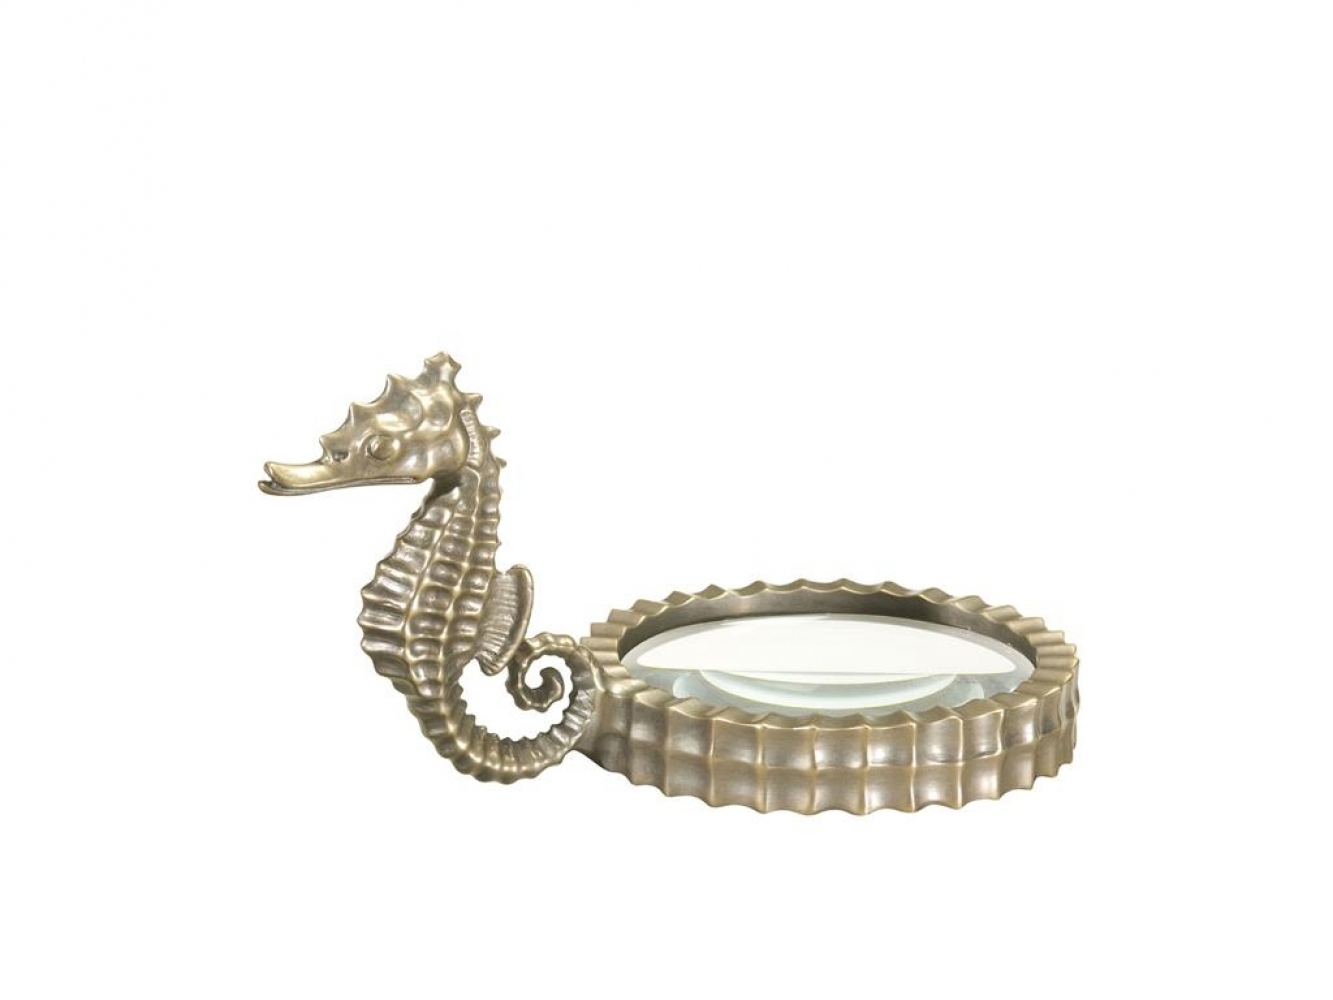 Seahorse Magnifying Glass